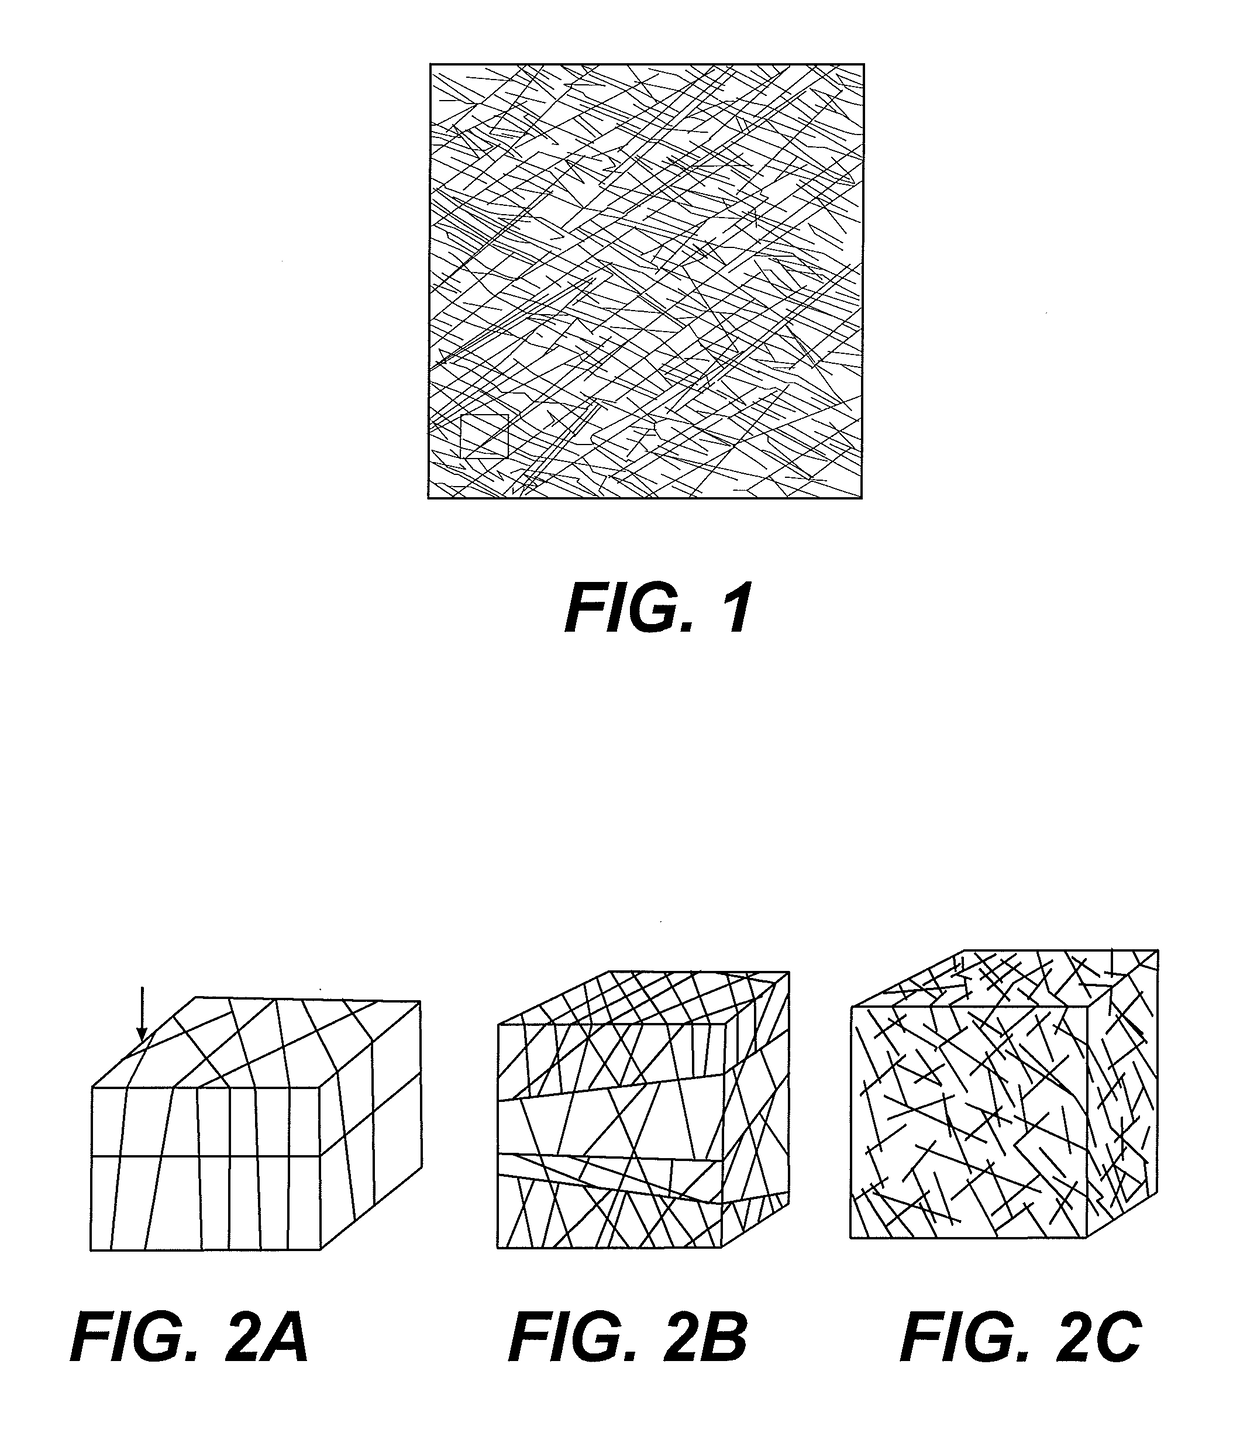 Method for characterizing the fracture network of a fractured reservoir and method for exploiting it